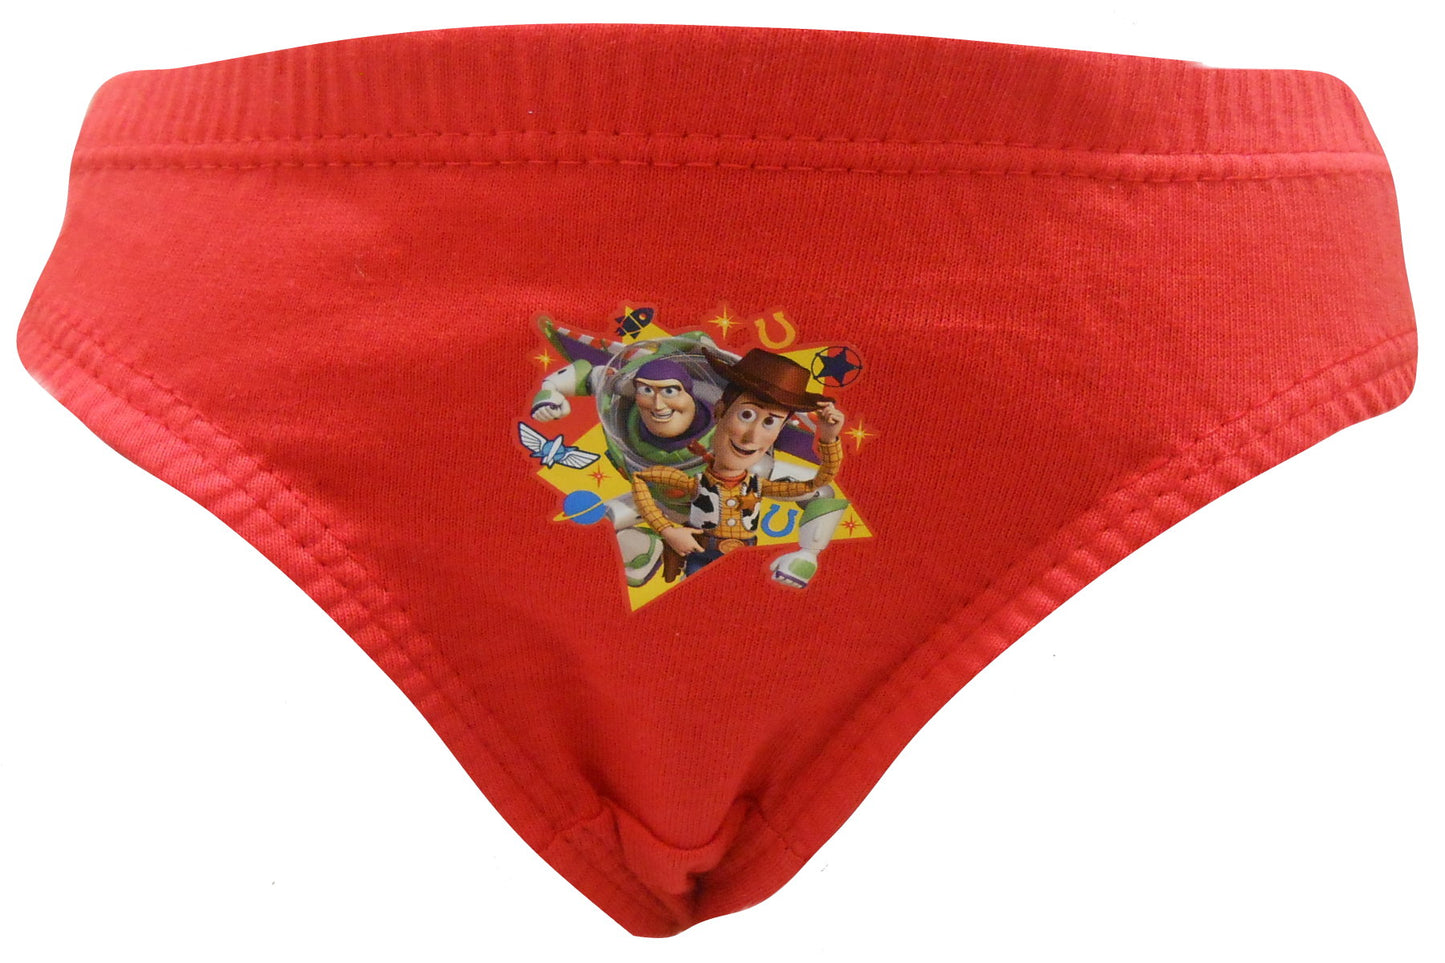 Disney Toy Story "Buzz & Woody" Boys 6 pack Briefs Underpants